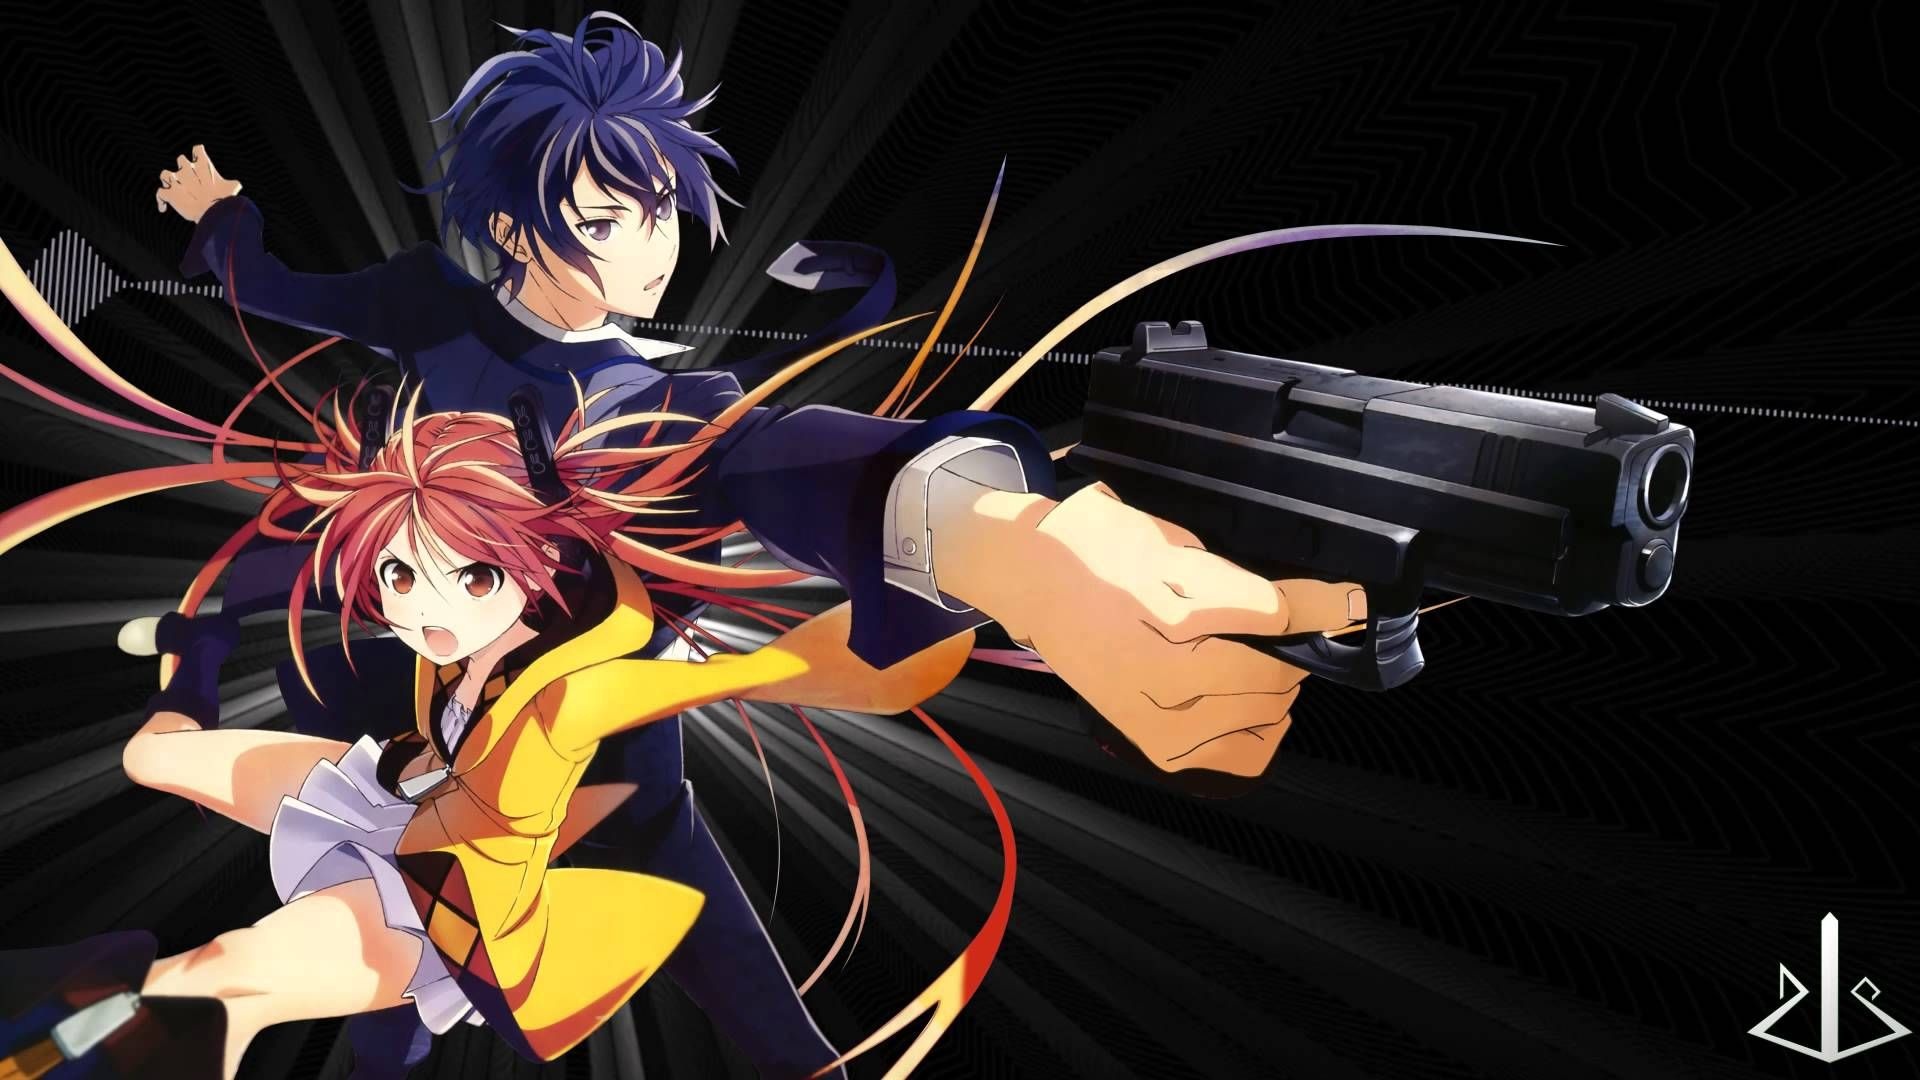 Black Bullet (Anime): Civil Securities, Formed to specialize in fighting against Gastrea. 1920x1080 Full HD Wallpaper.